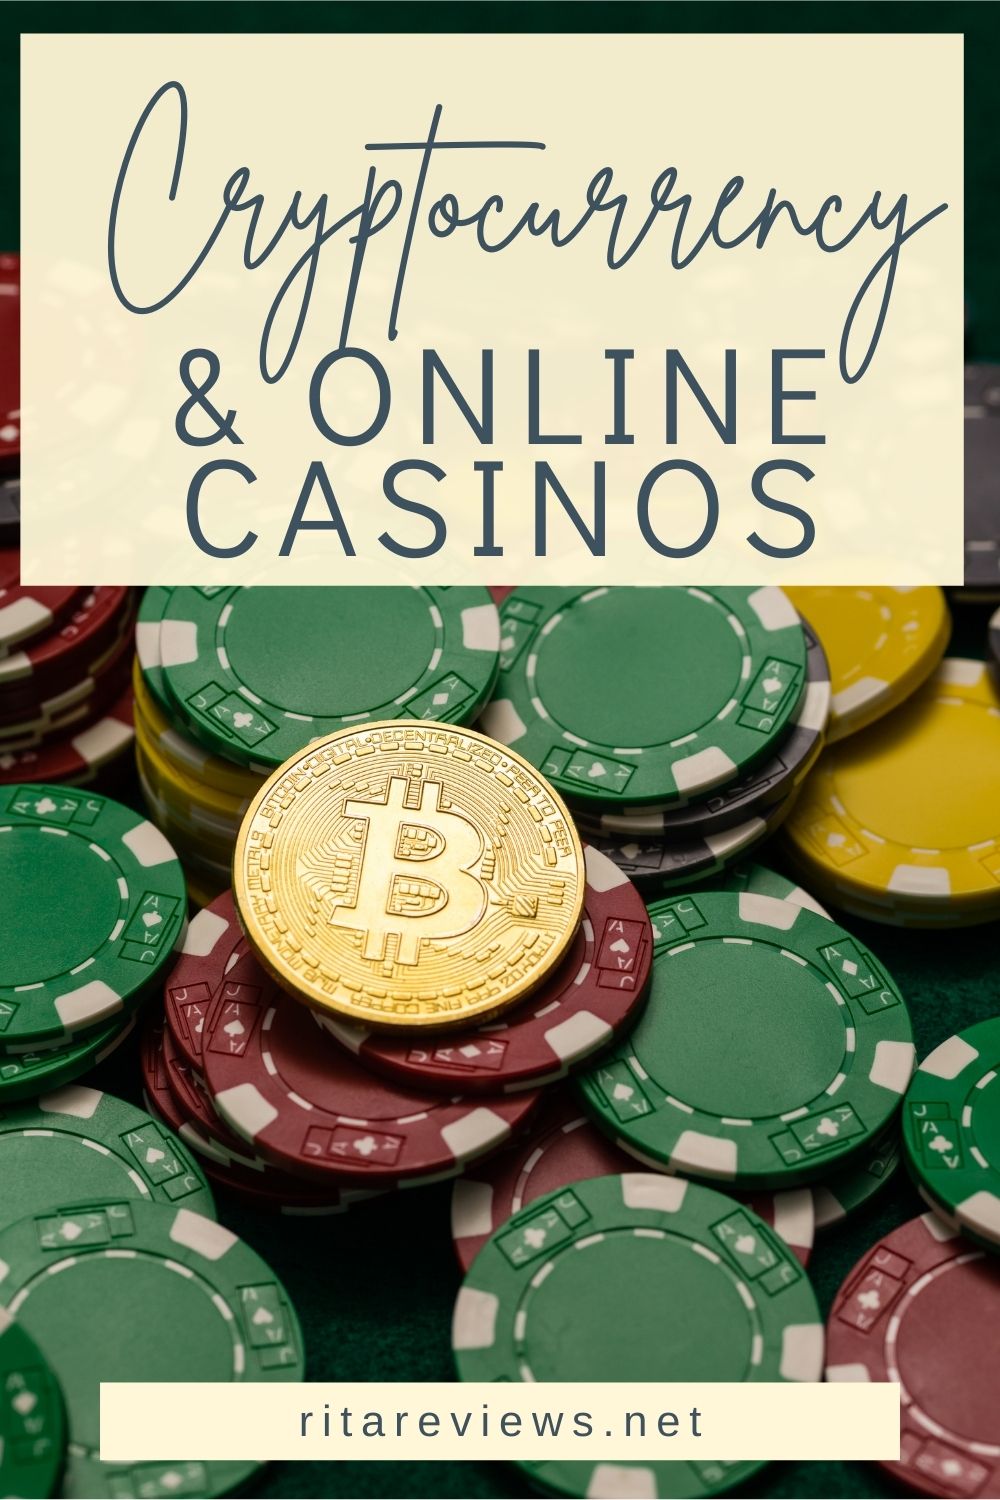 How Has Cryptocurrency Impacted Online Casinos